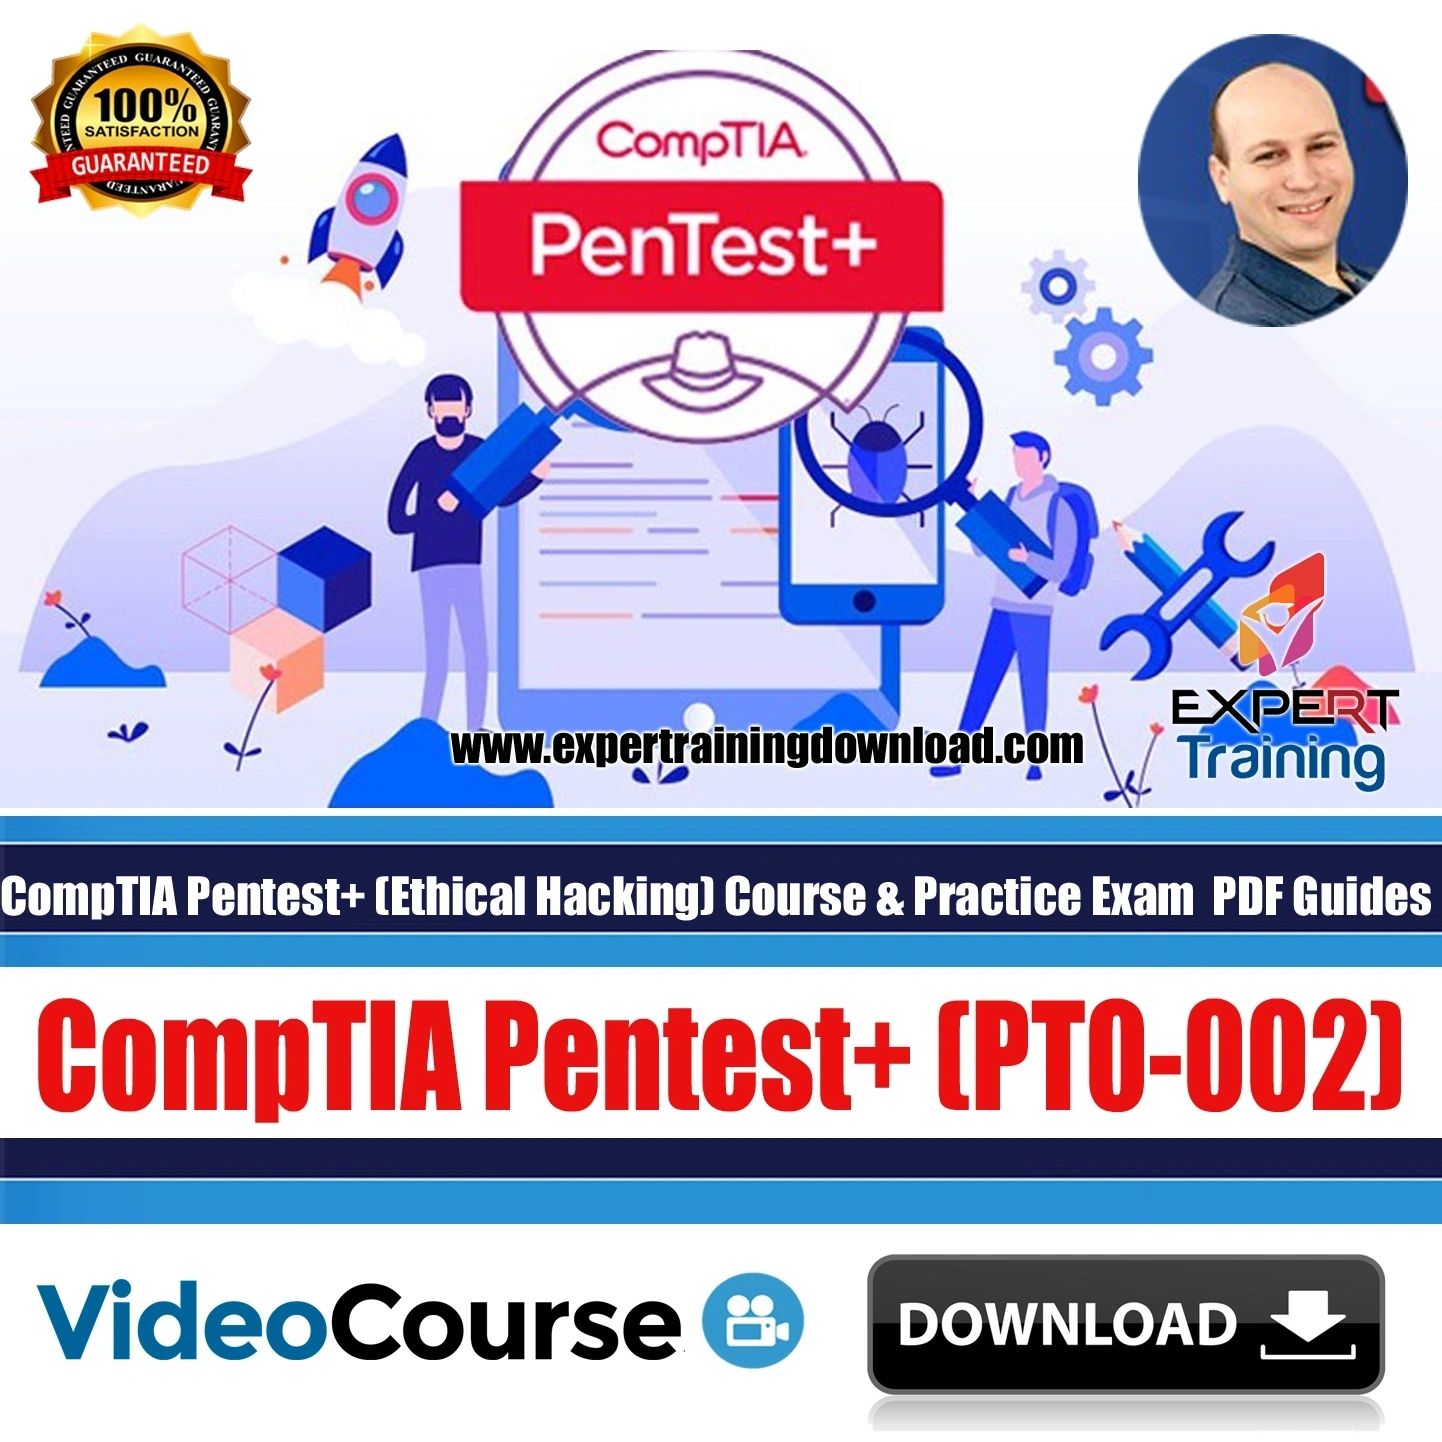 CompTIA Pentest+ (PT0-002) (Ethical Hacking) Course & Practice Exam PDF Guides